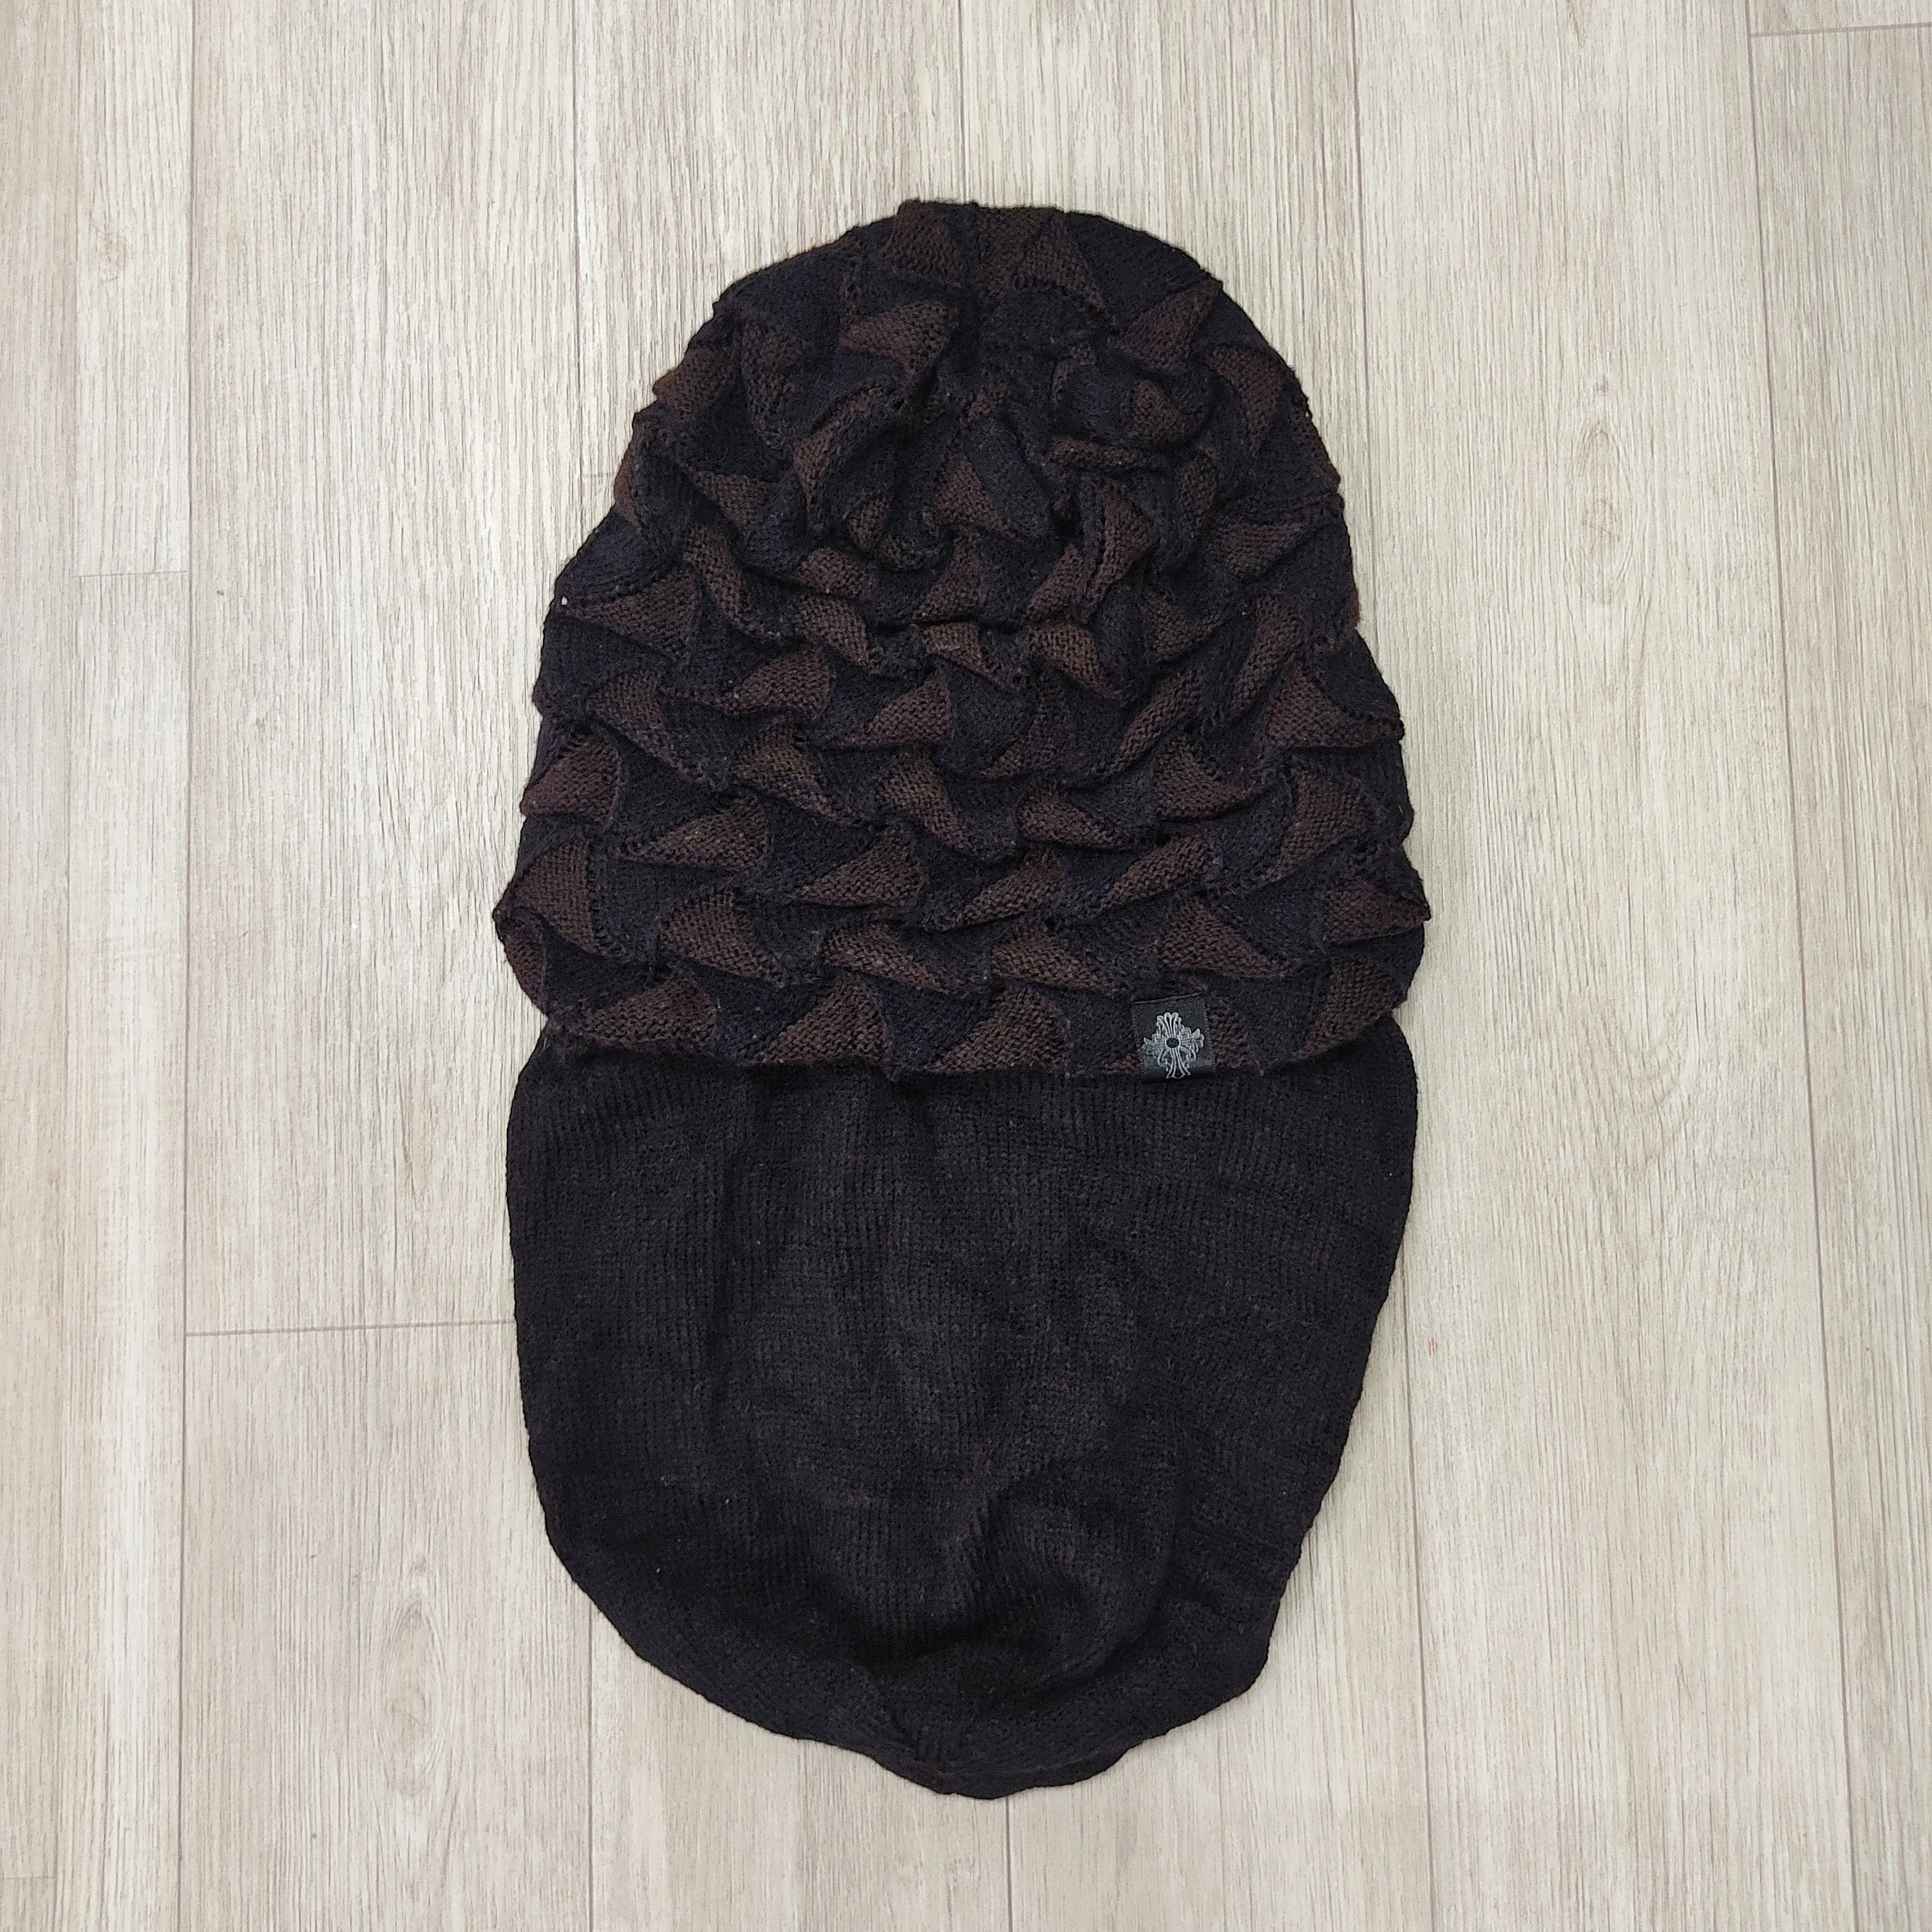 Rare - Reversible Knitted Chrome Hearts Inspired Pattern Beanie - 9